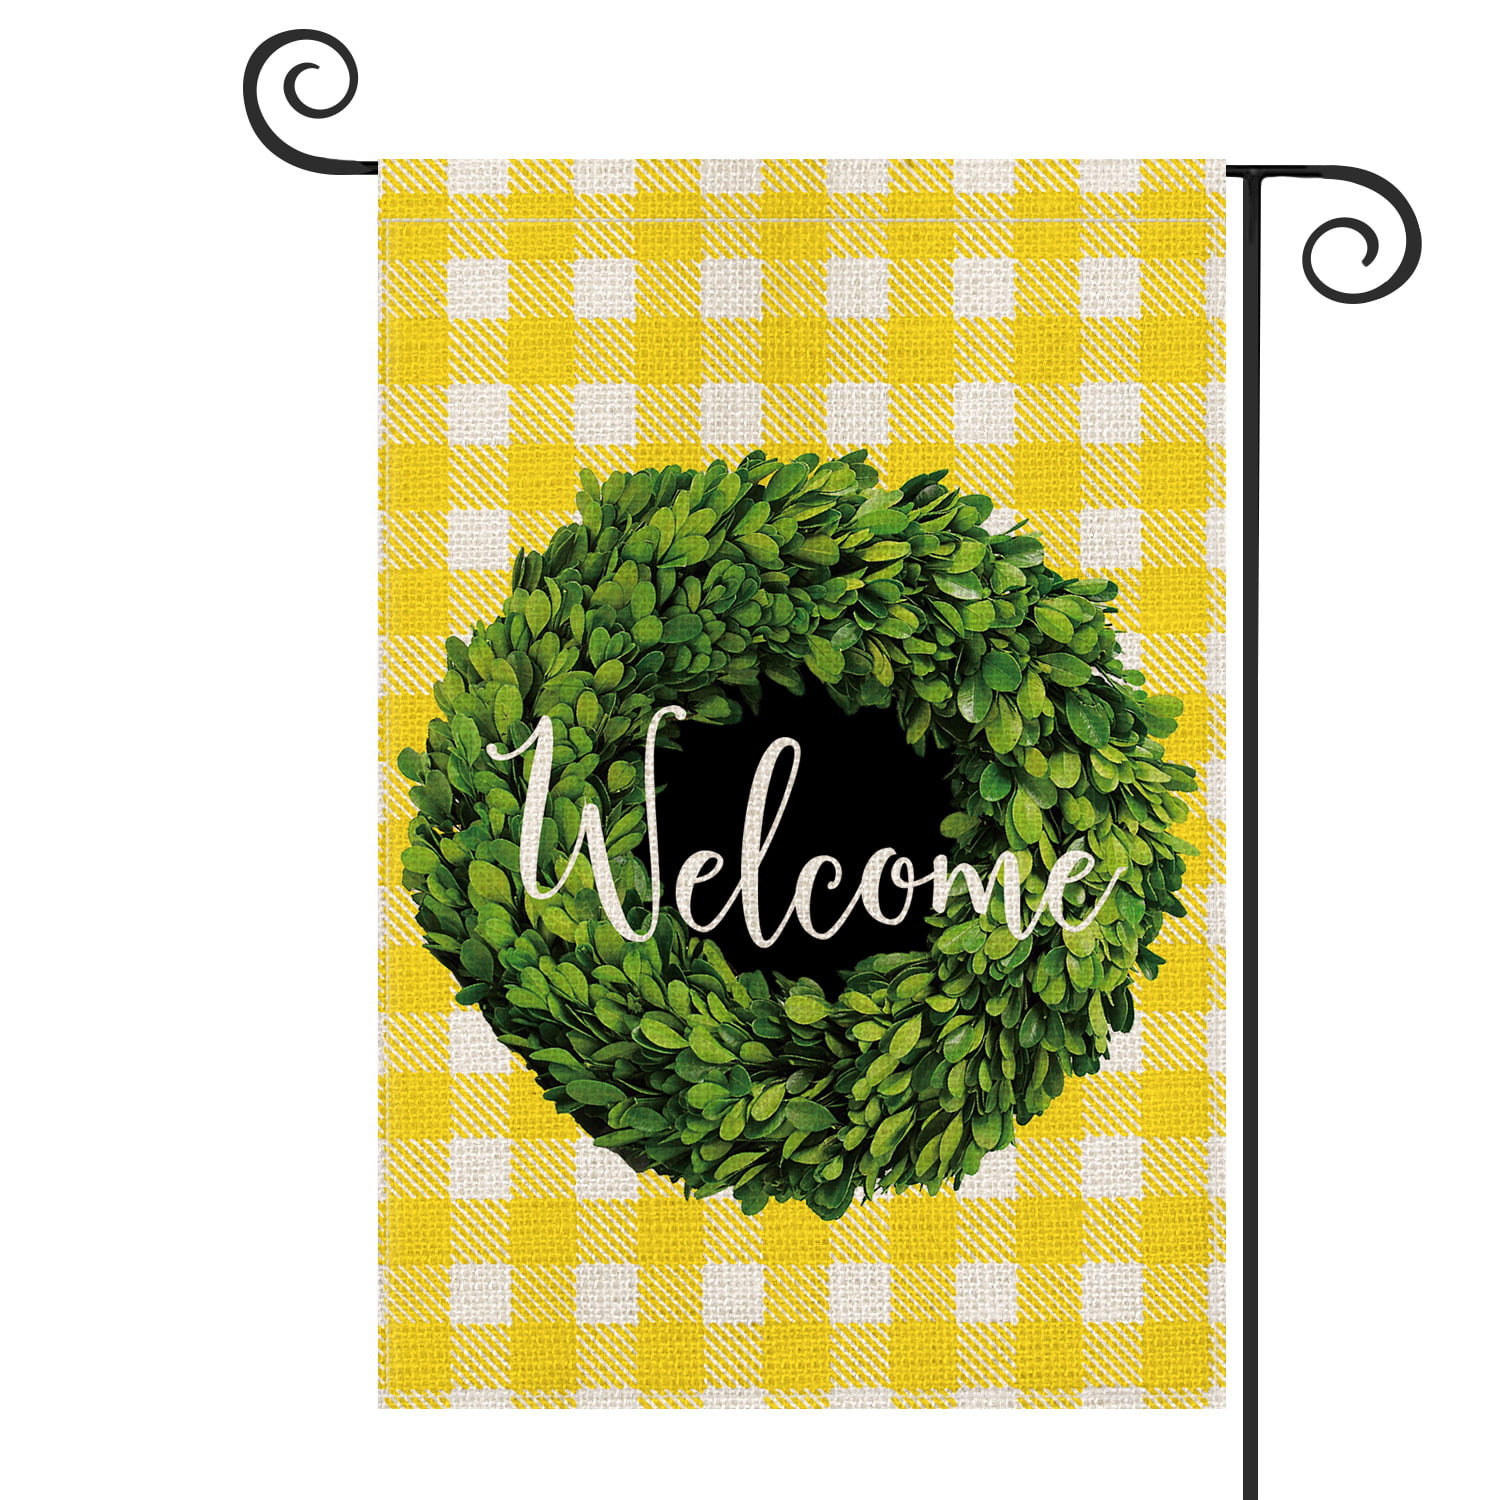 Buffalo Check Plaid Boxwood Wreath Premium Burlap Yard Flag for All Seasons for Outside Mogarden Welcome Spring Garden Flag 12.5 x 18 Inches Double Sided 